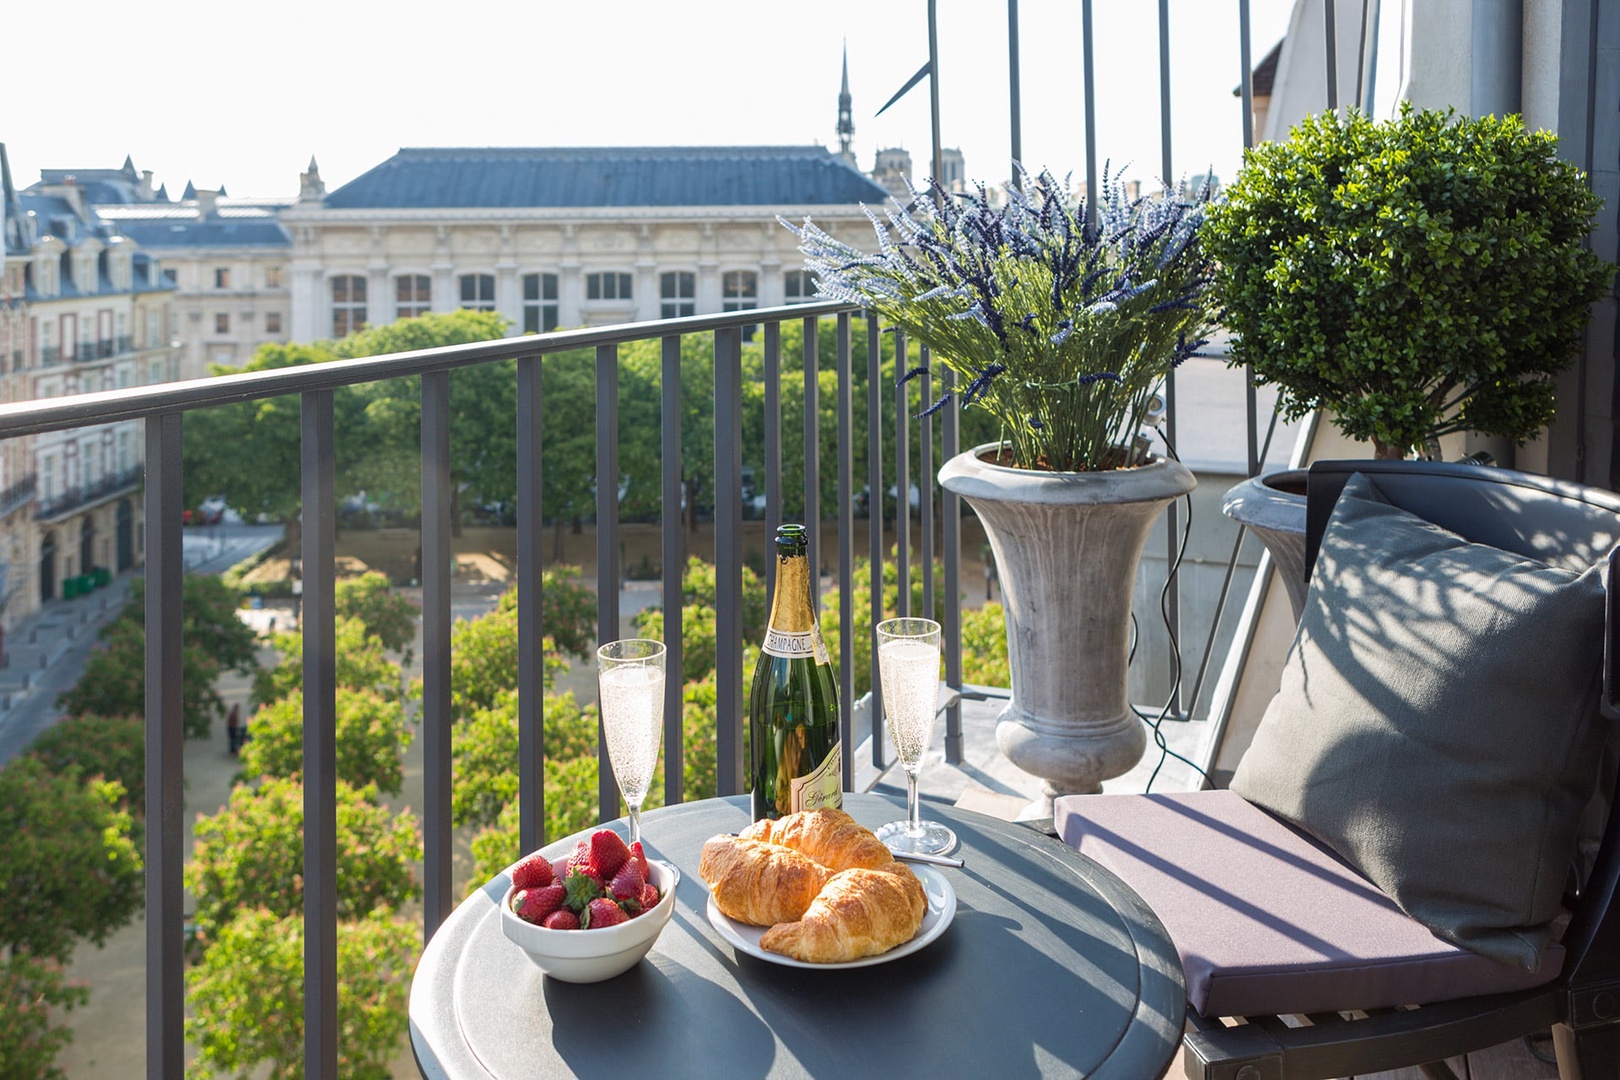 Toast your stay at the Savennières apartment in Paris!